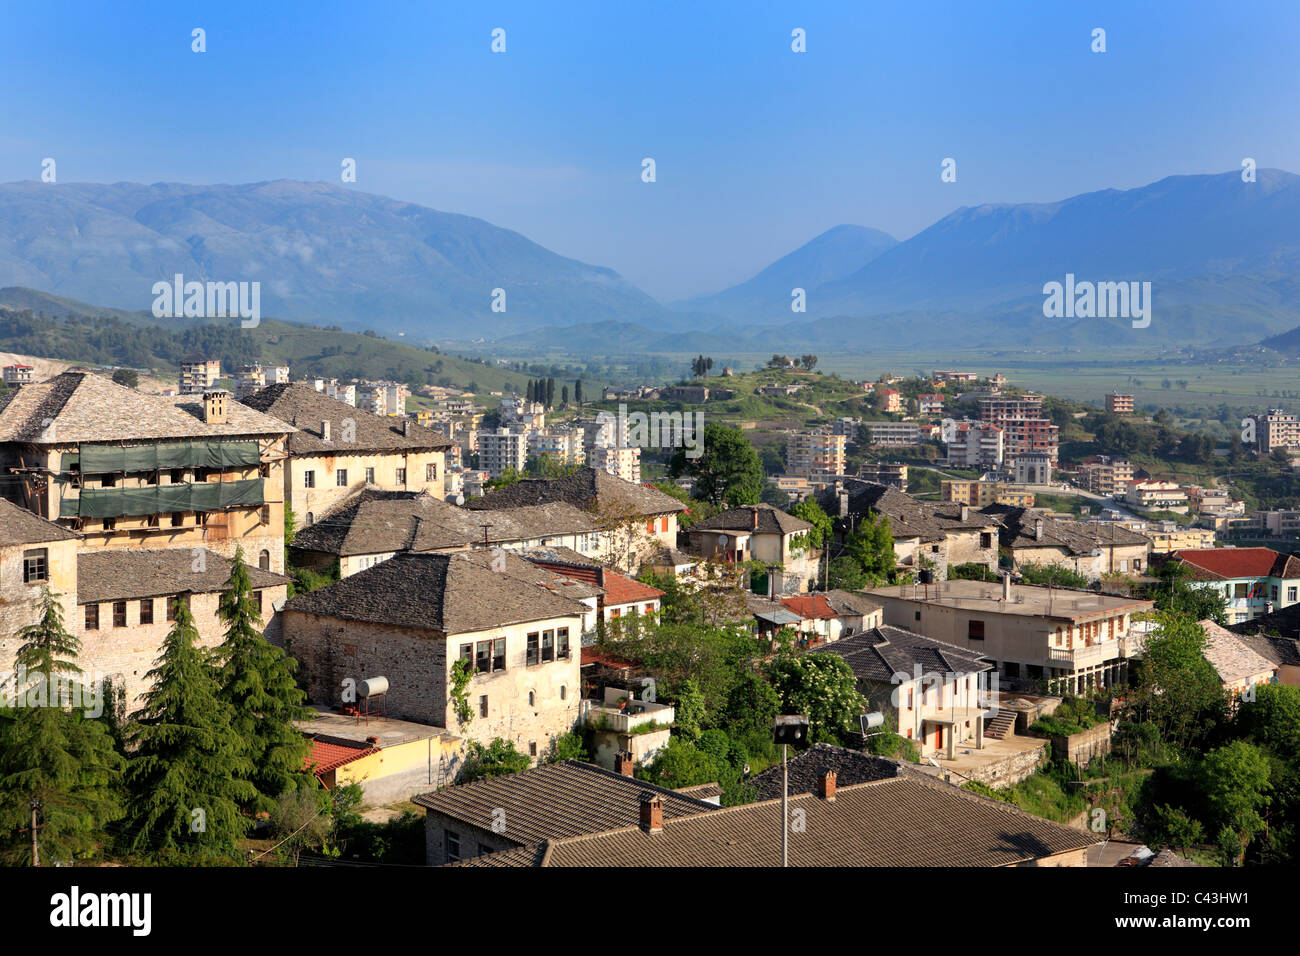 Albania, Balkans, Central Europe, Eastern Europe, European, Southern Europe, travel destinations, Architecture, building, house, Stock Photo